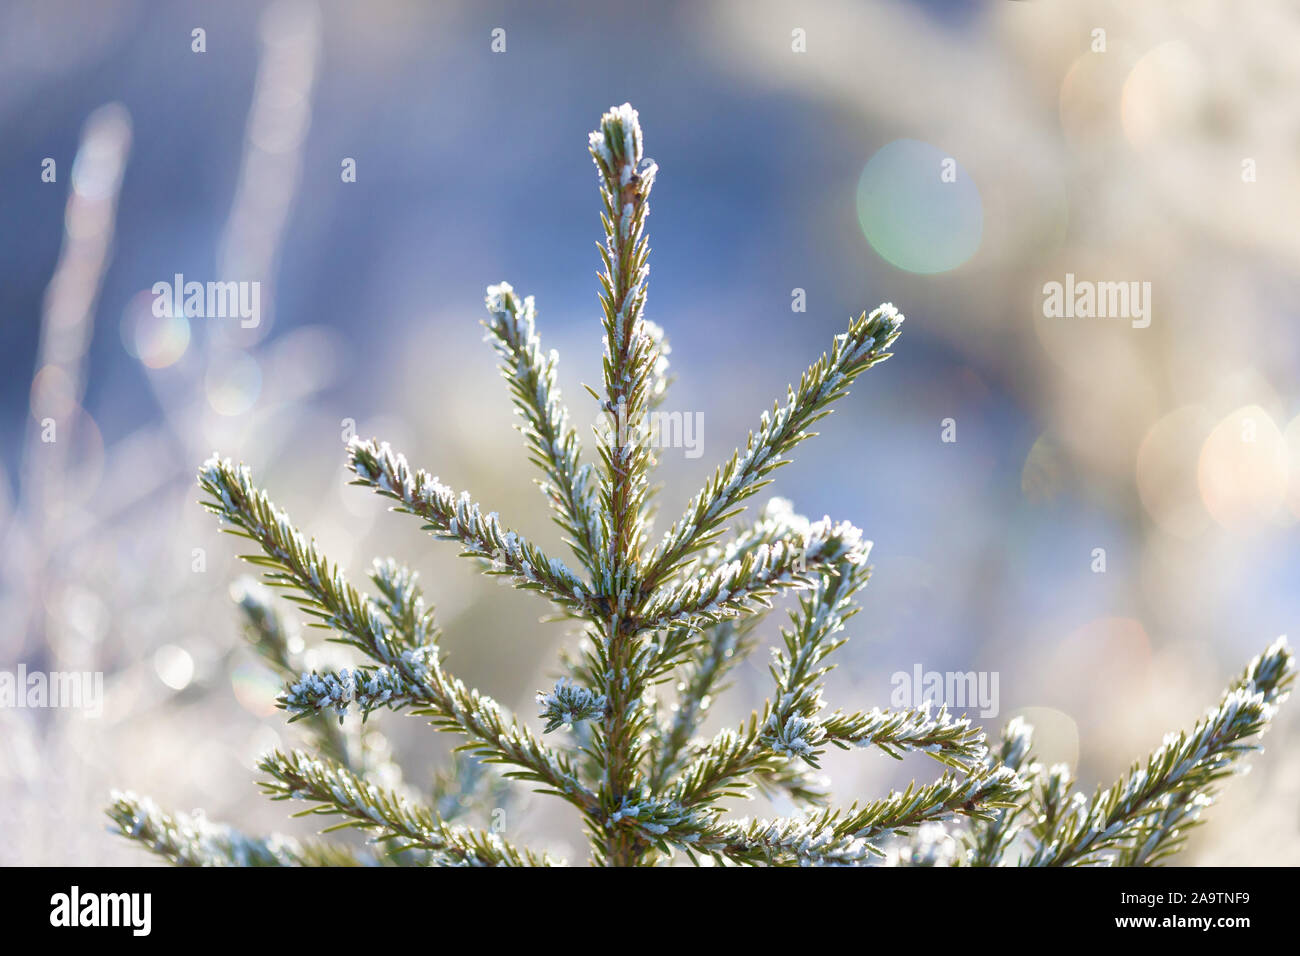 The top of a young spruce tree in hoarfrost, on a blurred multi-colored background with highlights Stock Photo